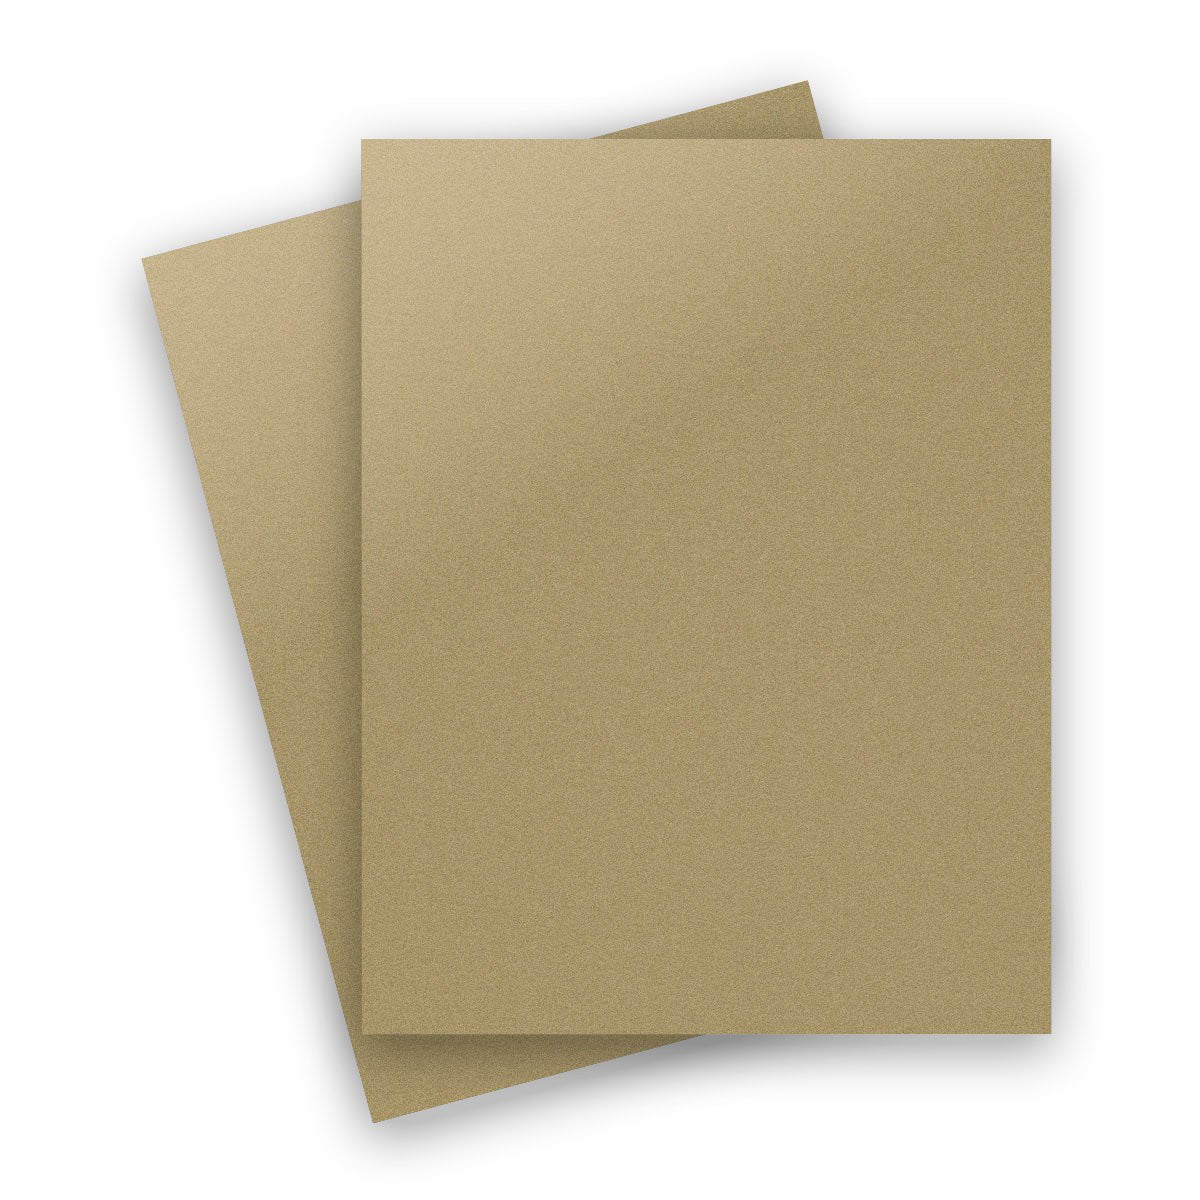 Antique Gold,25-PK PaperPapers Metallic 8.5X11 Letter Size 32T Specialty Paper Lightweight foldable multi-use